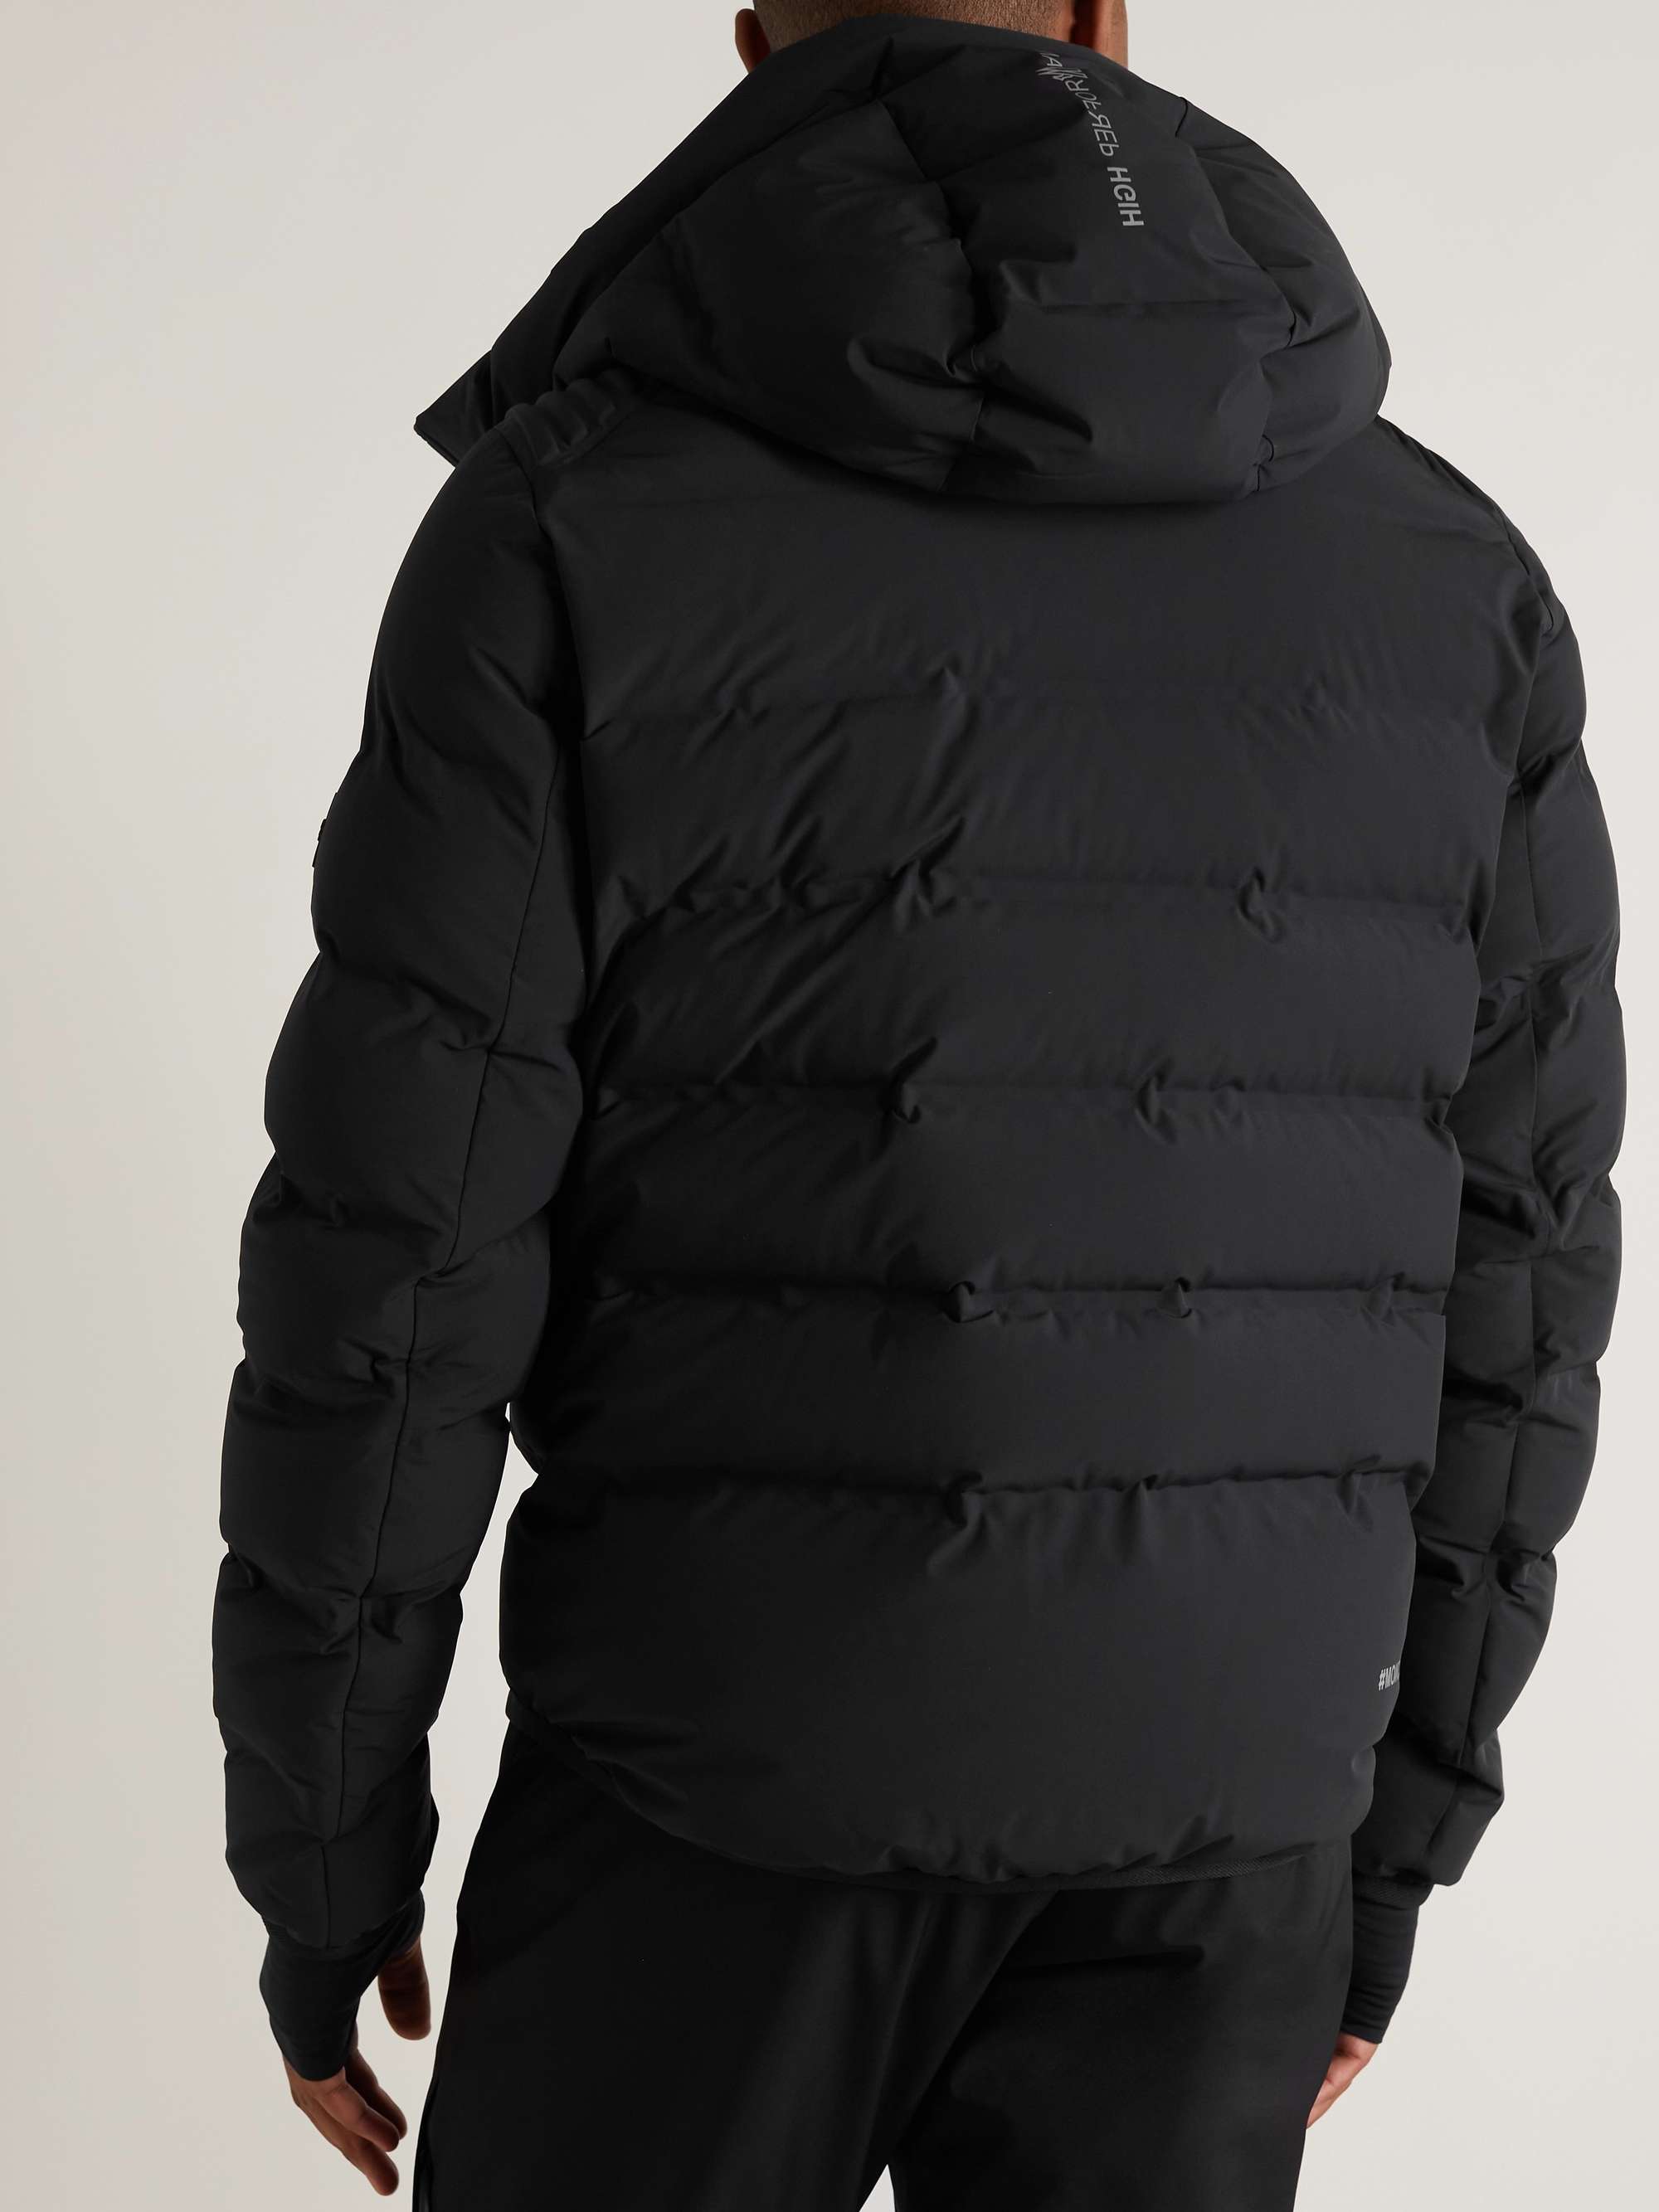 Lagorai Quilted Hooded Down Ski Jacket